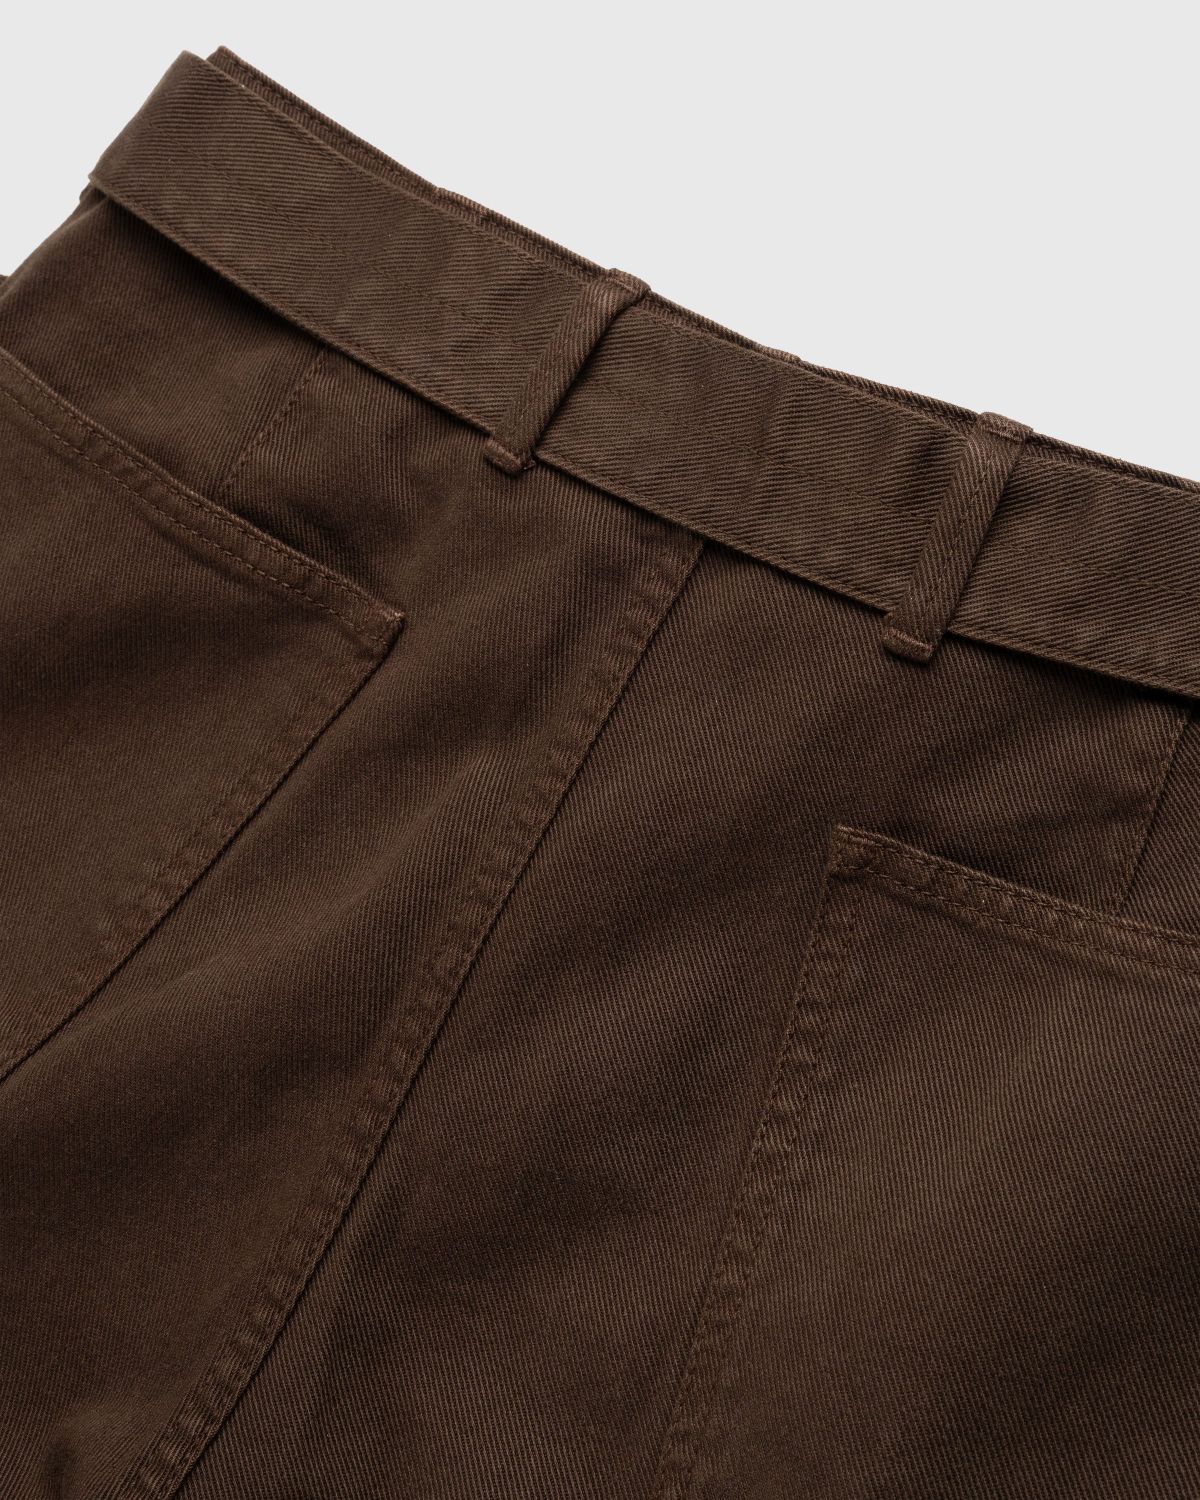 Lemaire – Twisted Belted Casual Pant - Pants - Brown - Image 6